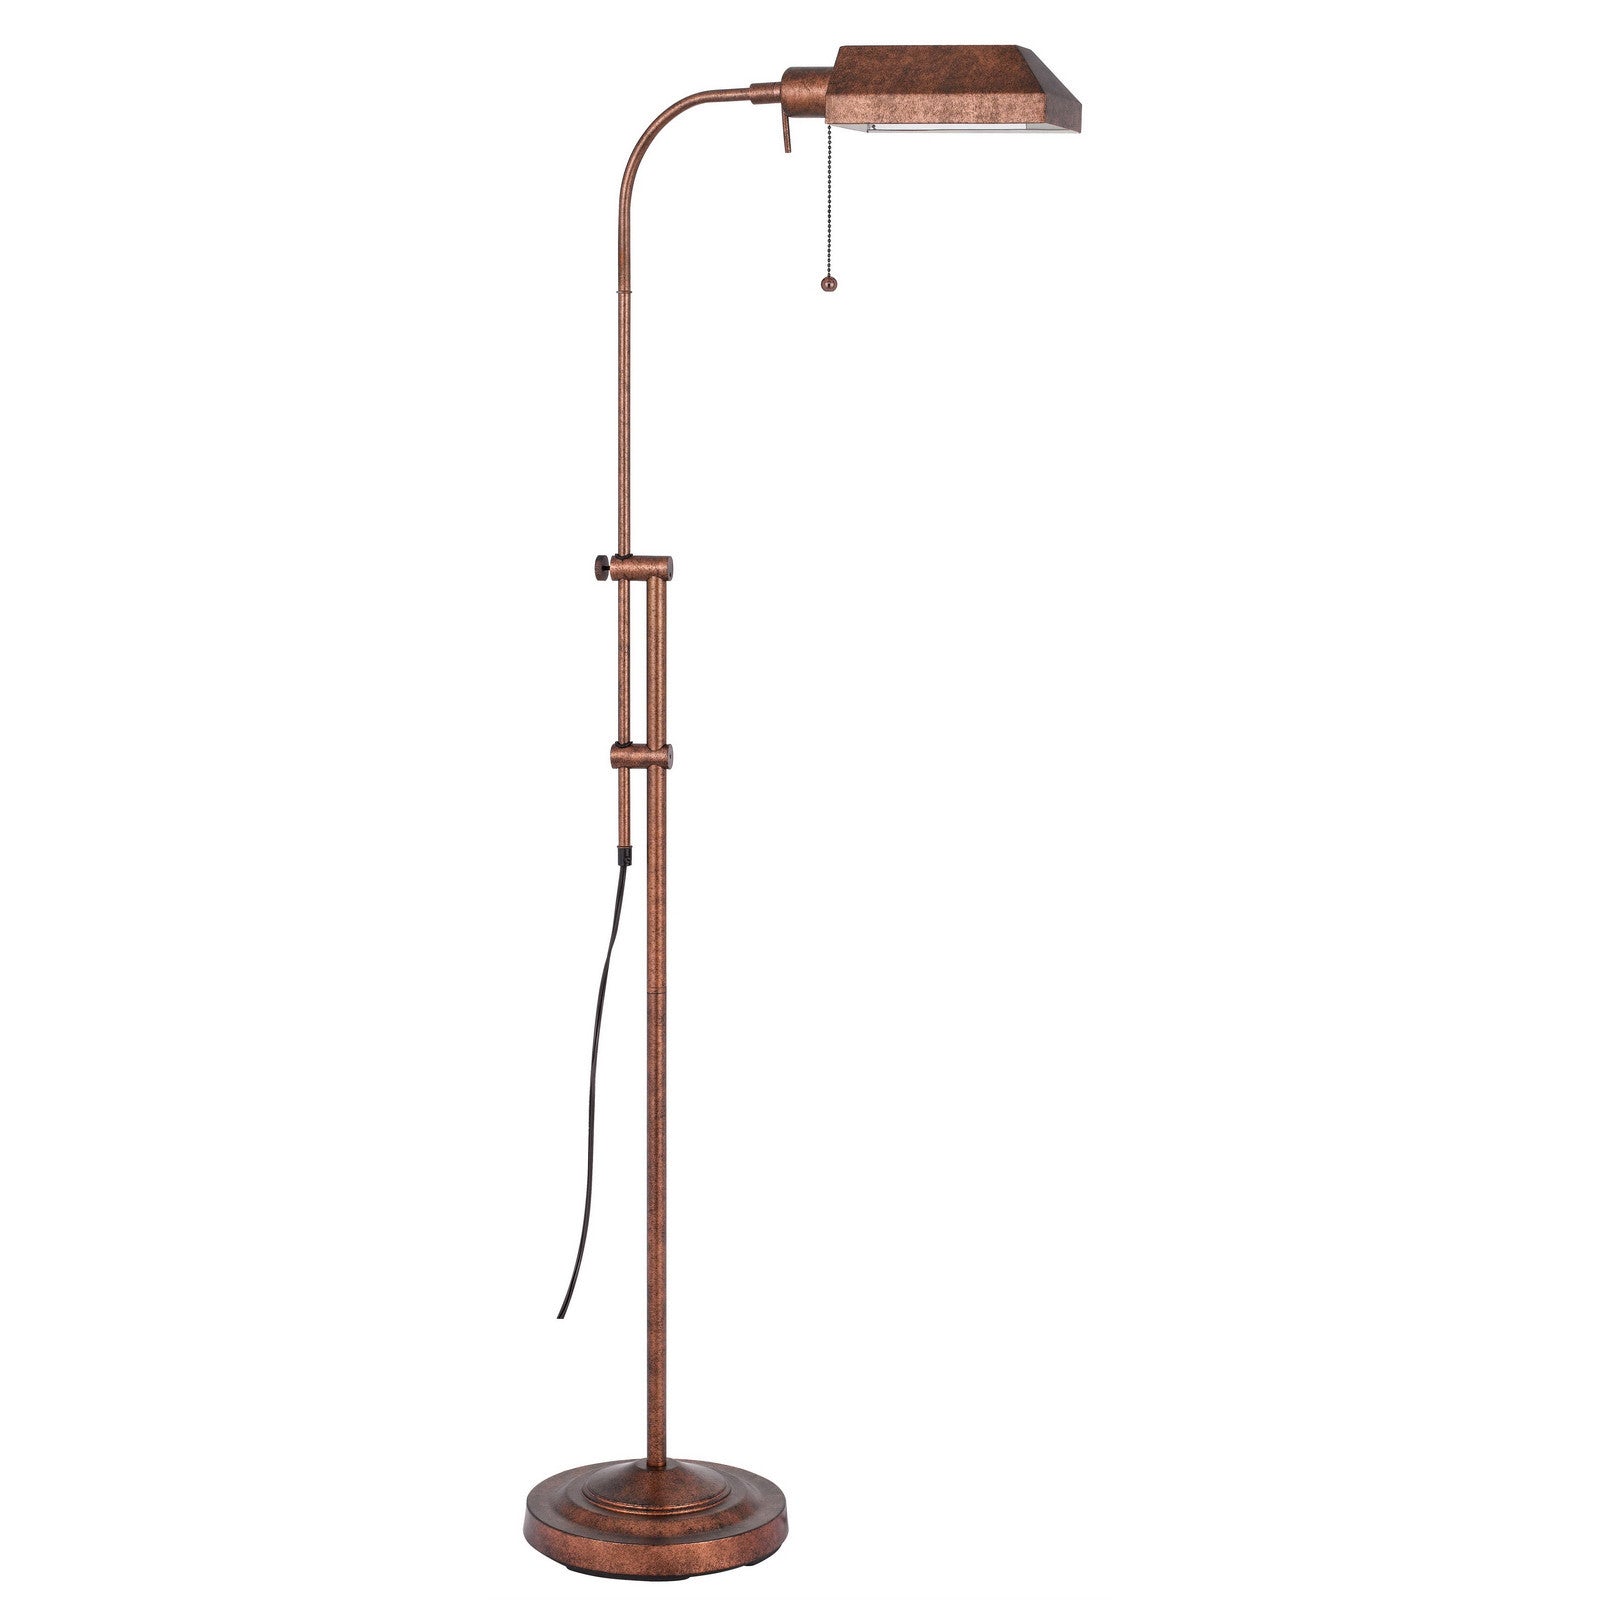 57" Rusted Adjustable Traditional Shaped Floor Lamp With Rust Square Shade